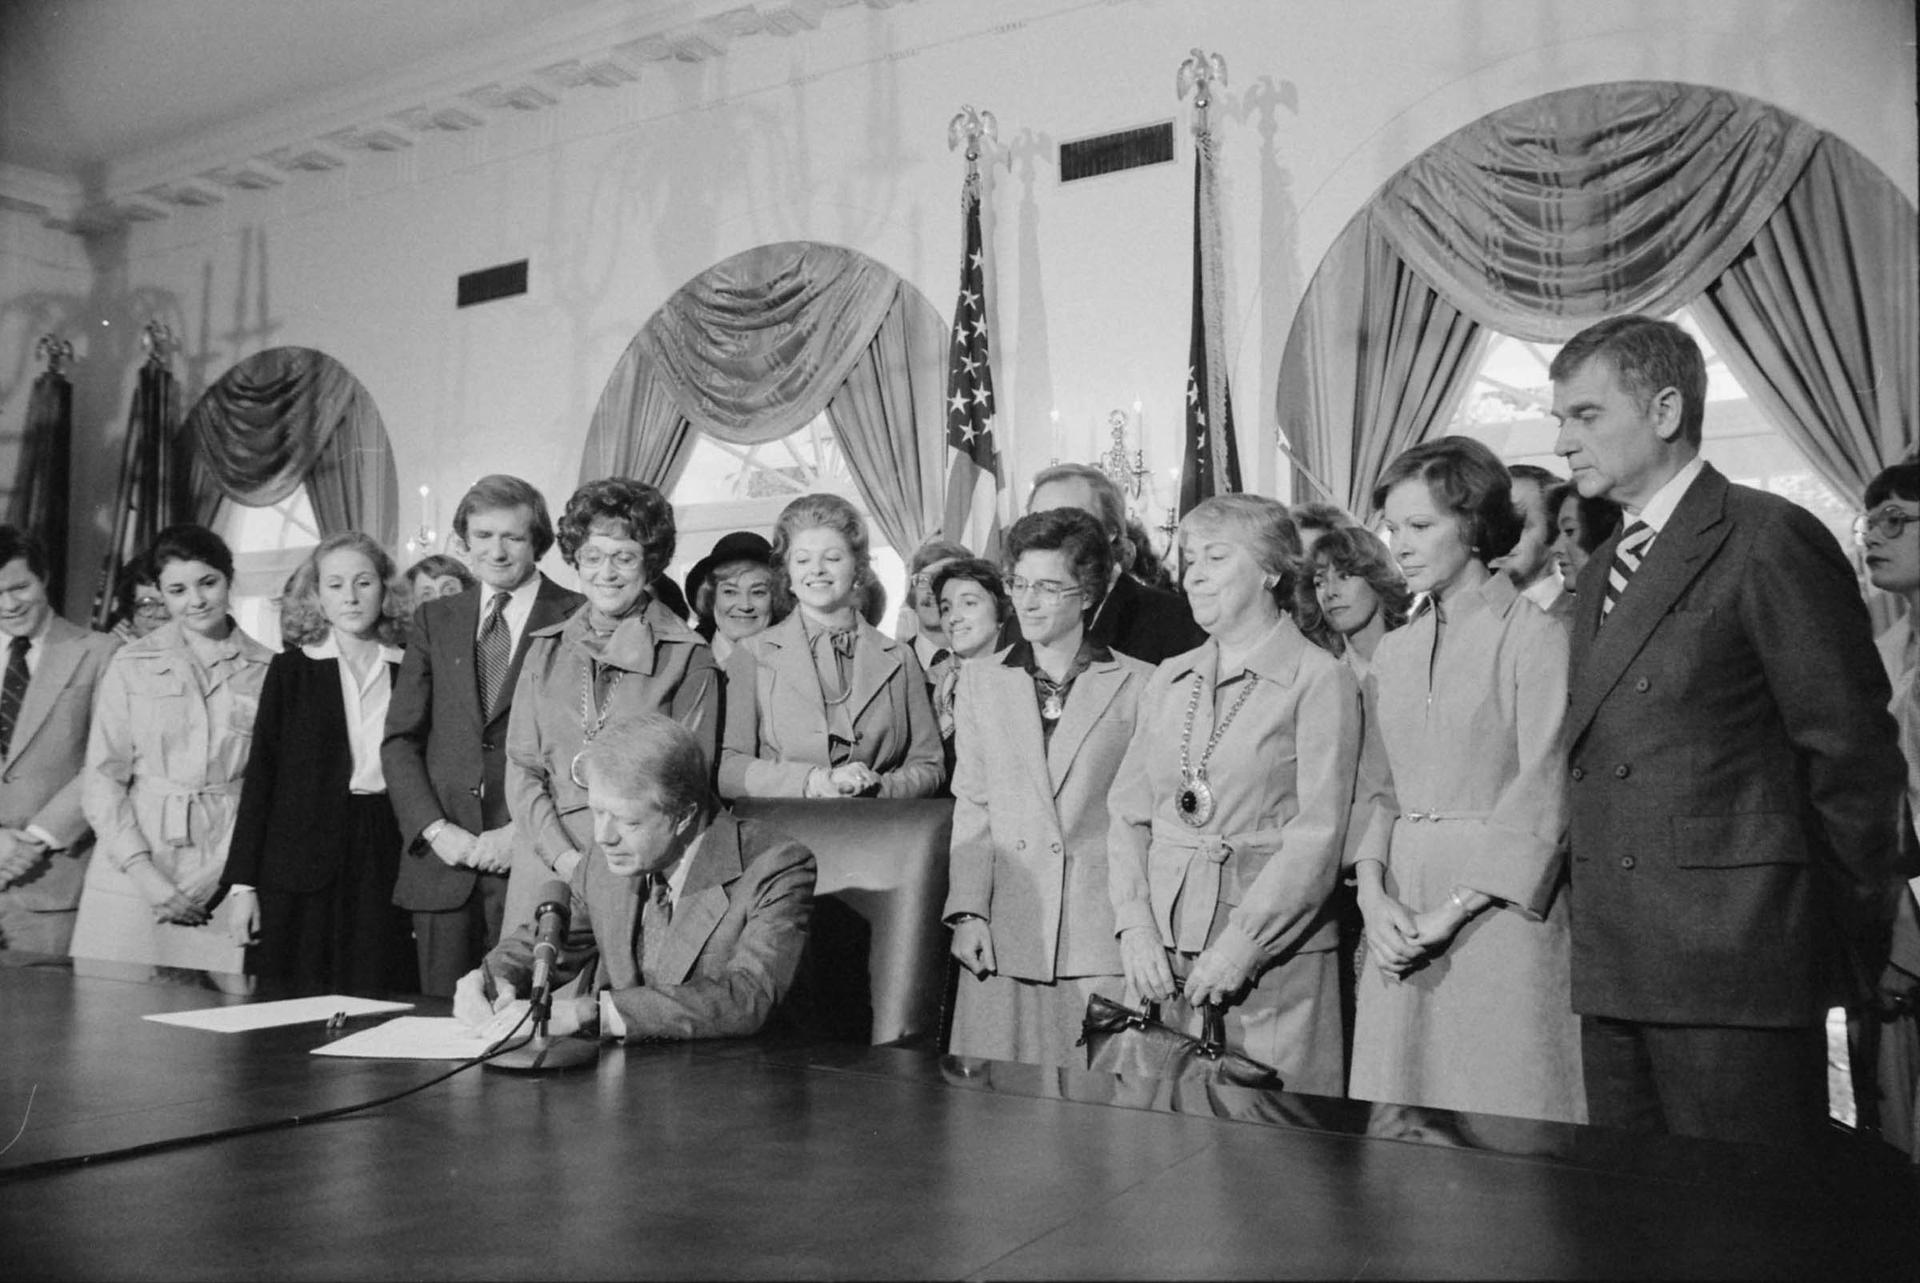 Jimmy Carter sitting down with several women standing behind him 